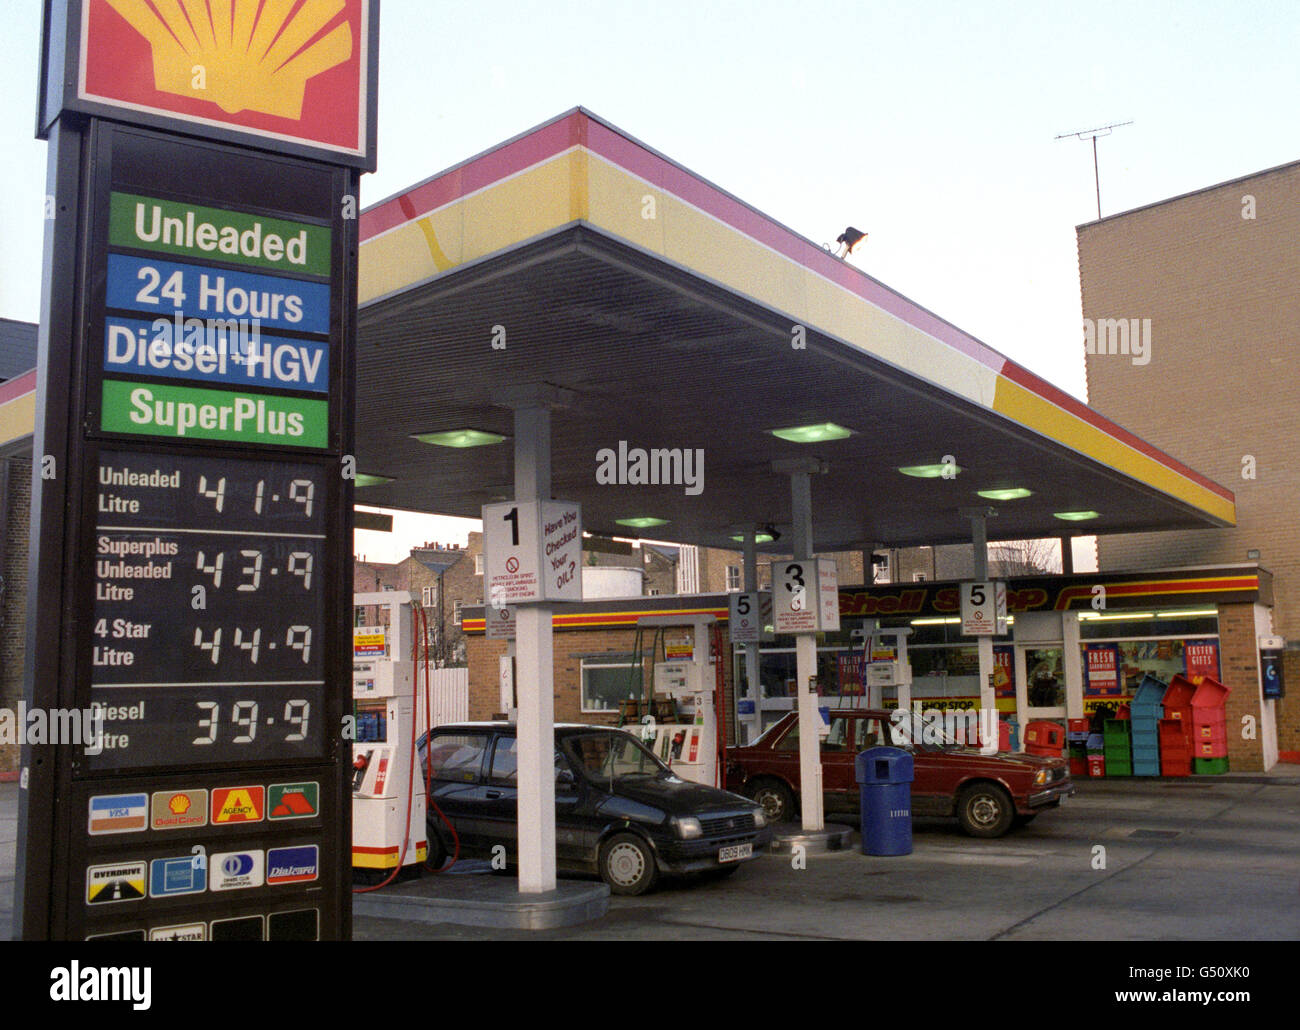 Fuel Industry - Shell Station - London. A Shell fuel station in London, selling unleaded at 41.9p per litre and diesel at 39.9p per litre Stock Photo